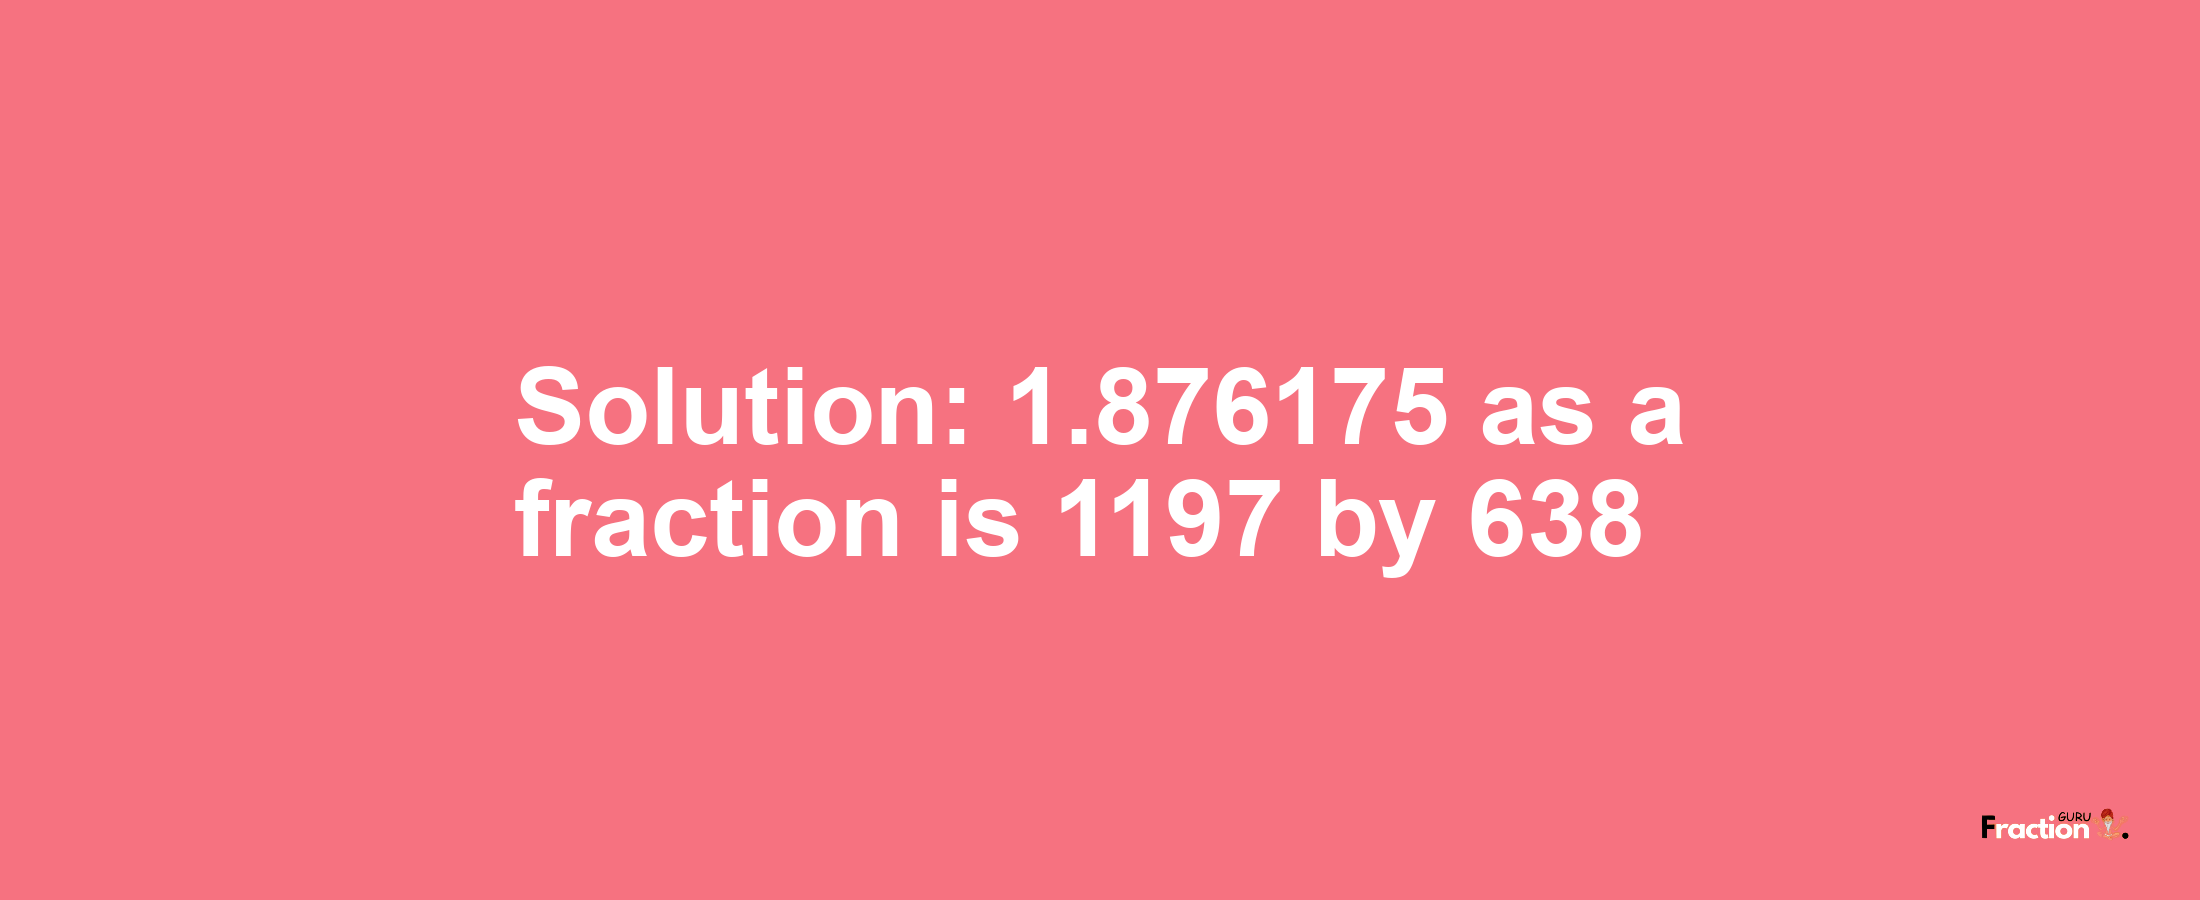 Solution:1.876175 as a fraction is 1197/638